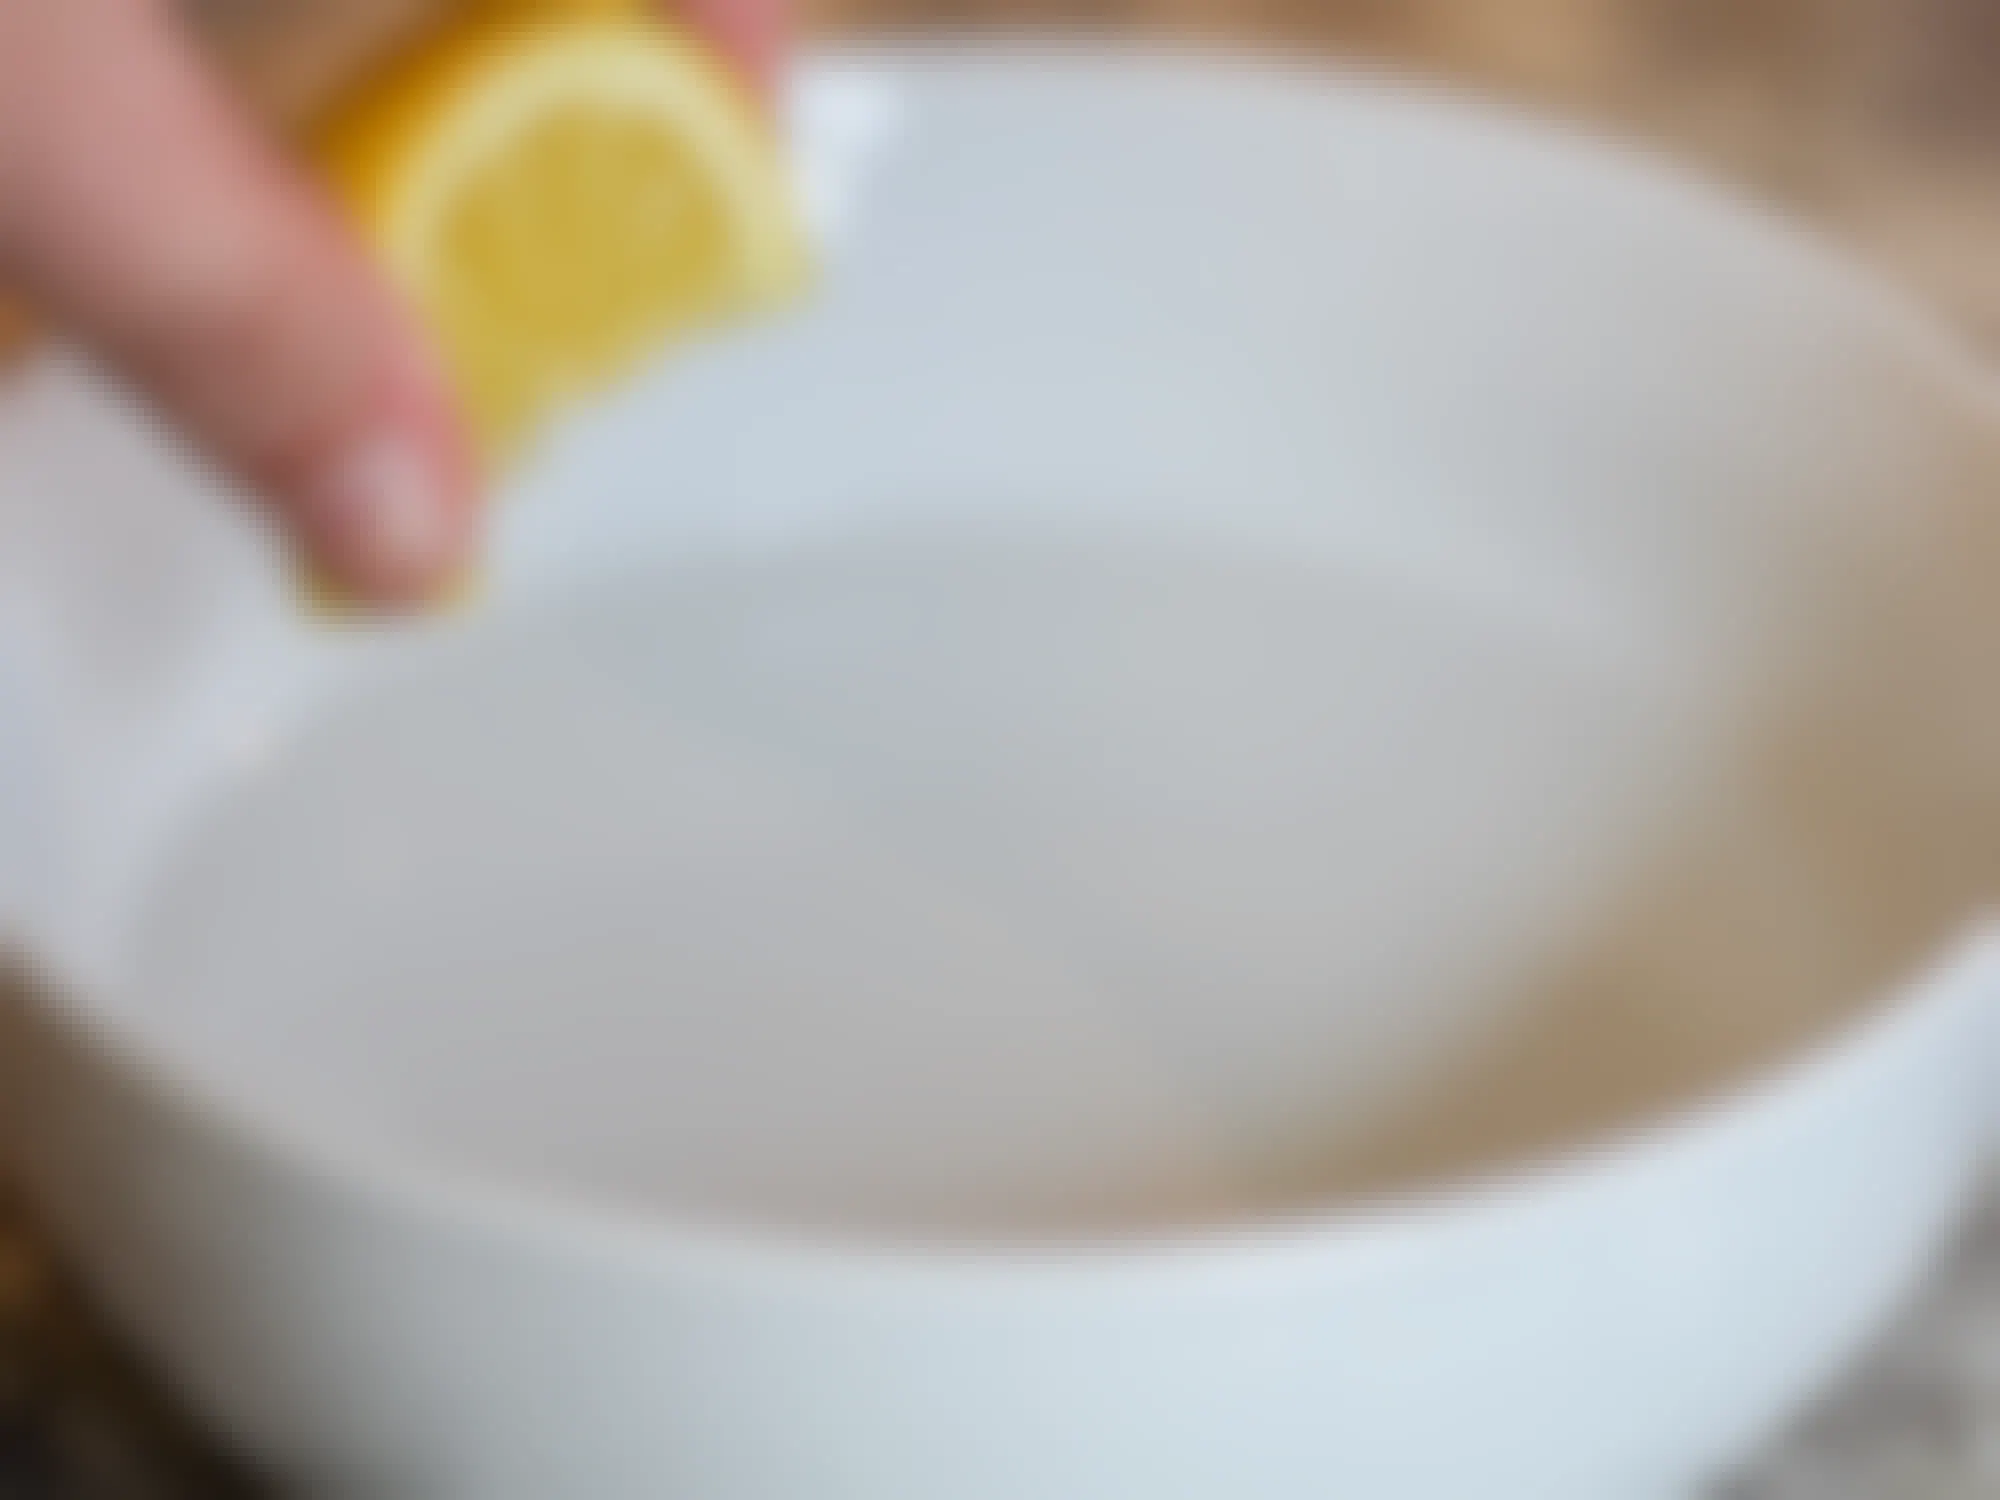 a person squeezing a lemon wedge into a bowl full of water